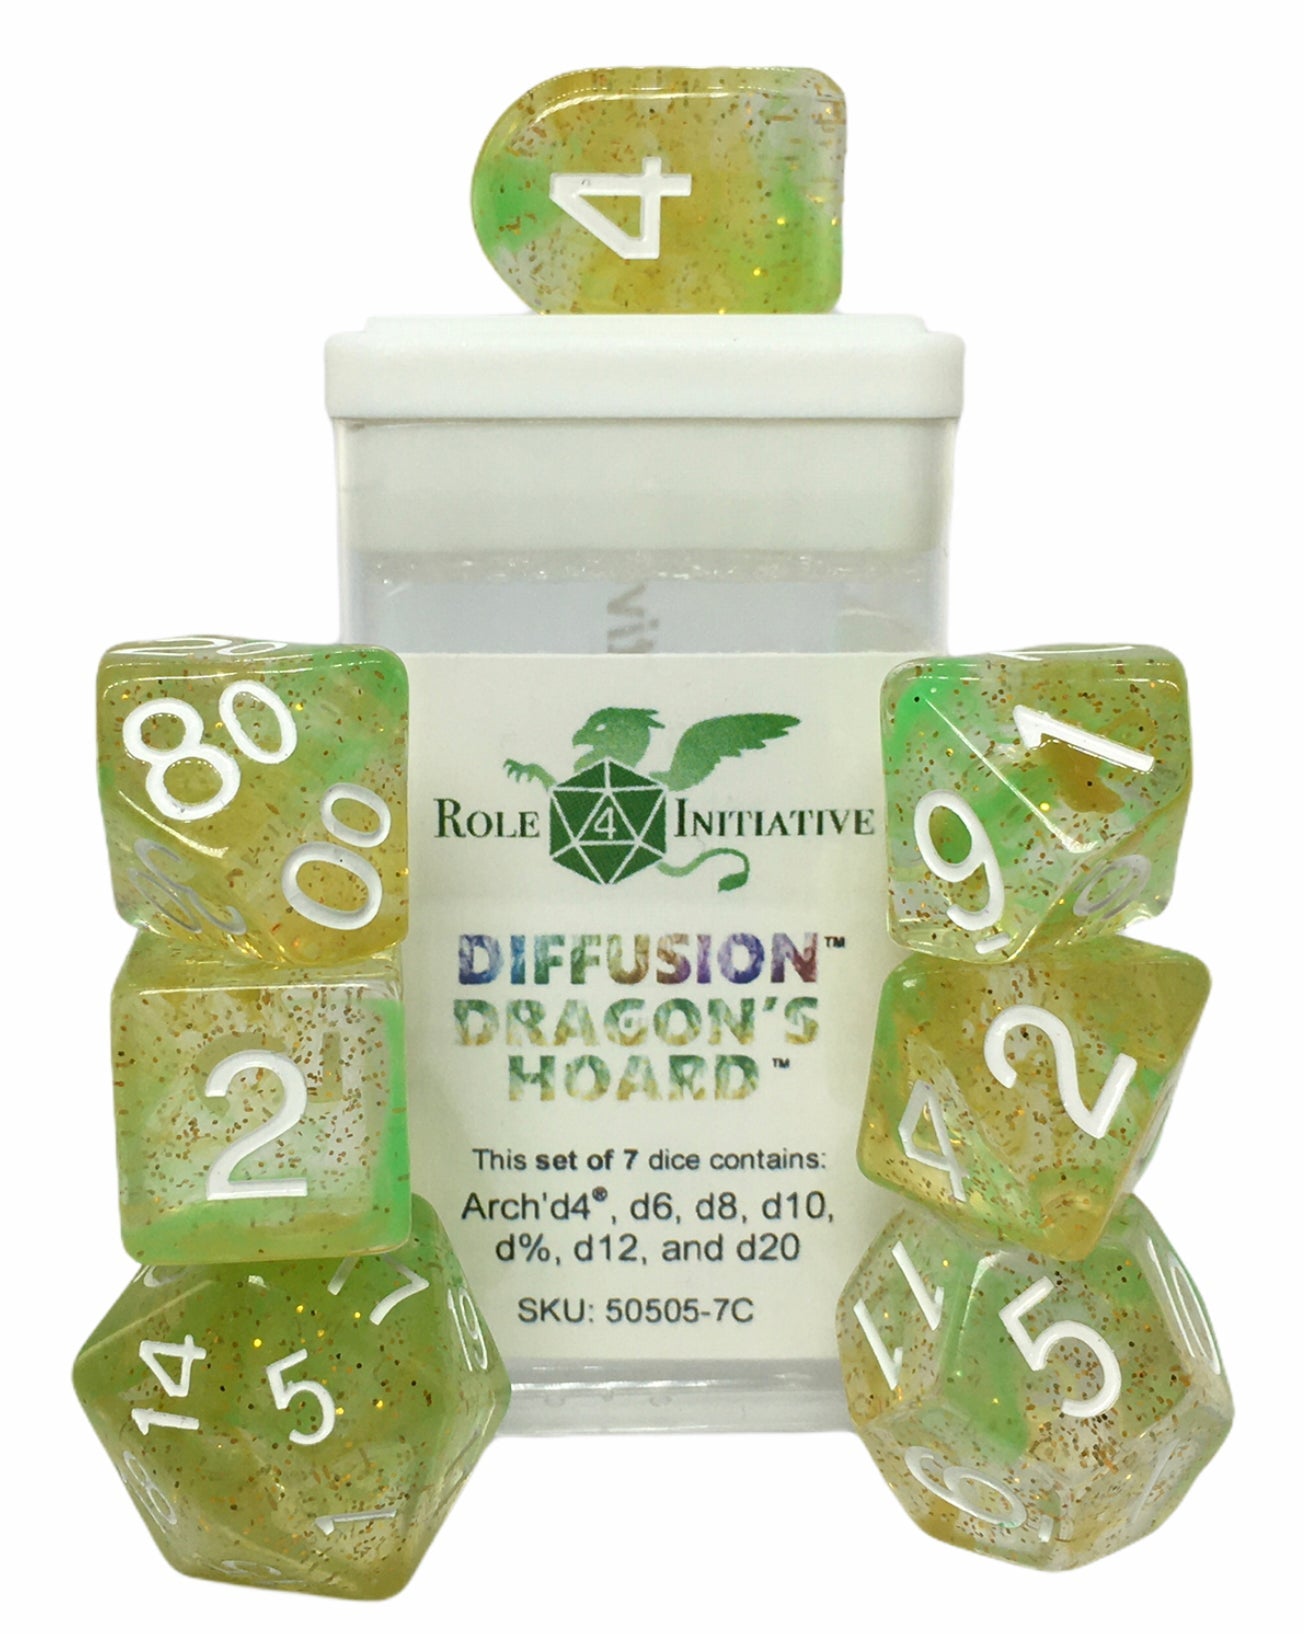 Role 4 Initiative Dungeons Dragons Dice Diffusion Bloodstone - Sets Singles  Set of 7 w/ Arch'd4 in box